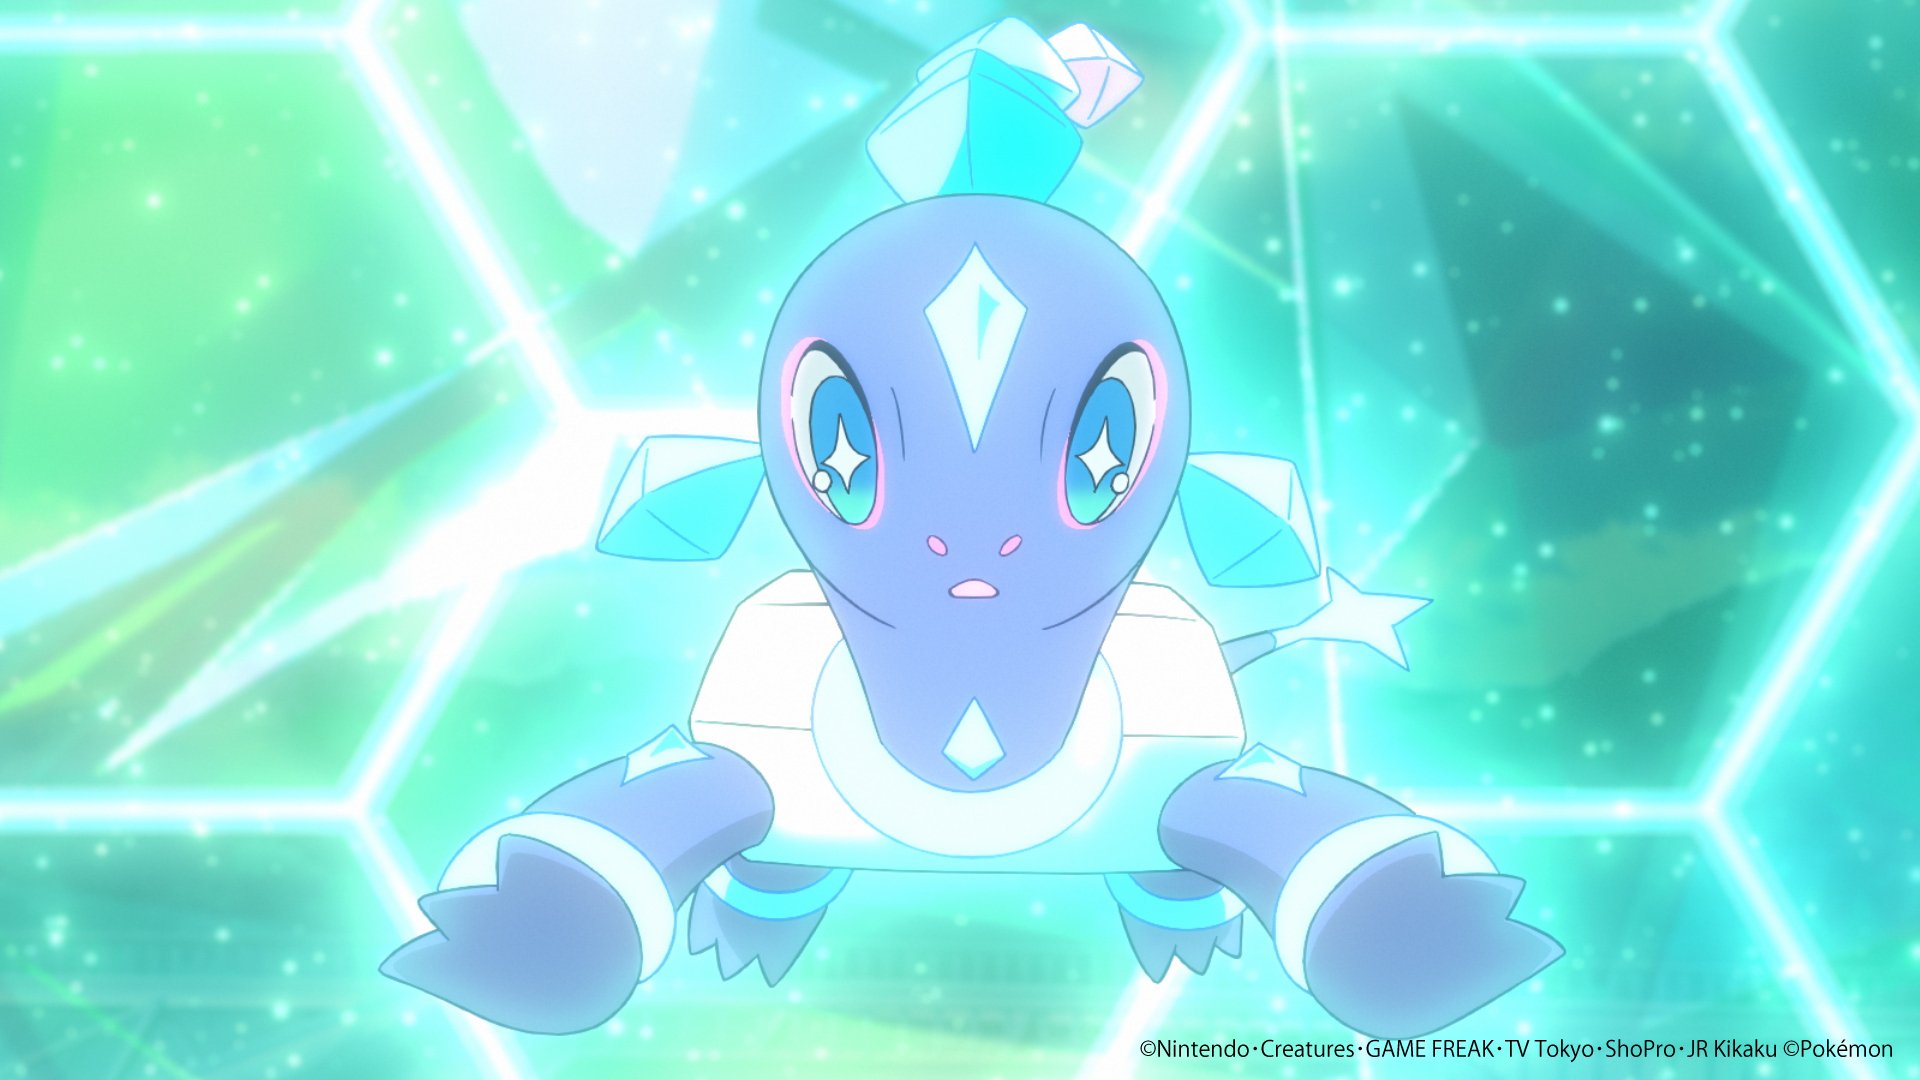 Pokémon anime to relaunch with new characters - Ash, Pikachu bow out after  25 years - NZ Herald